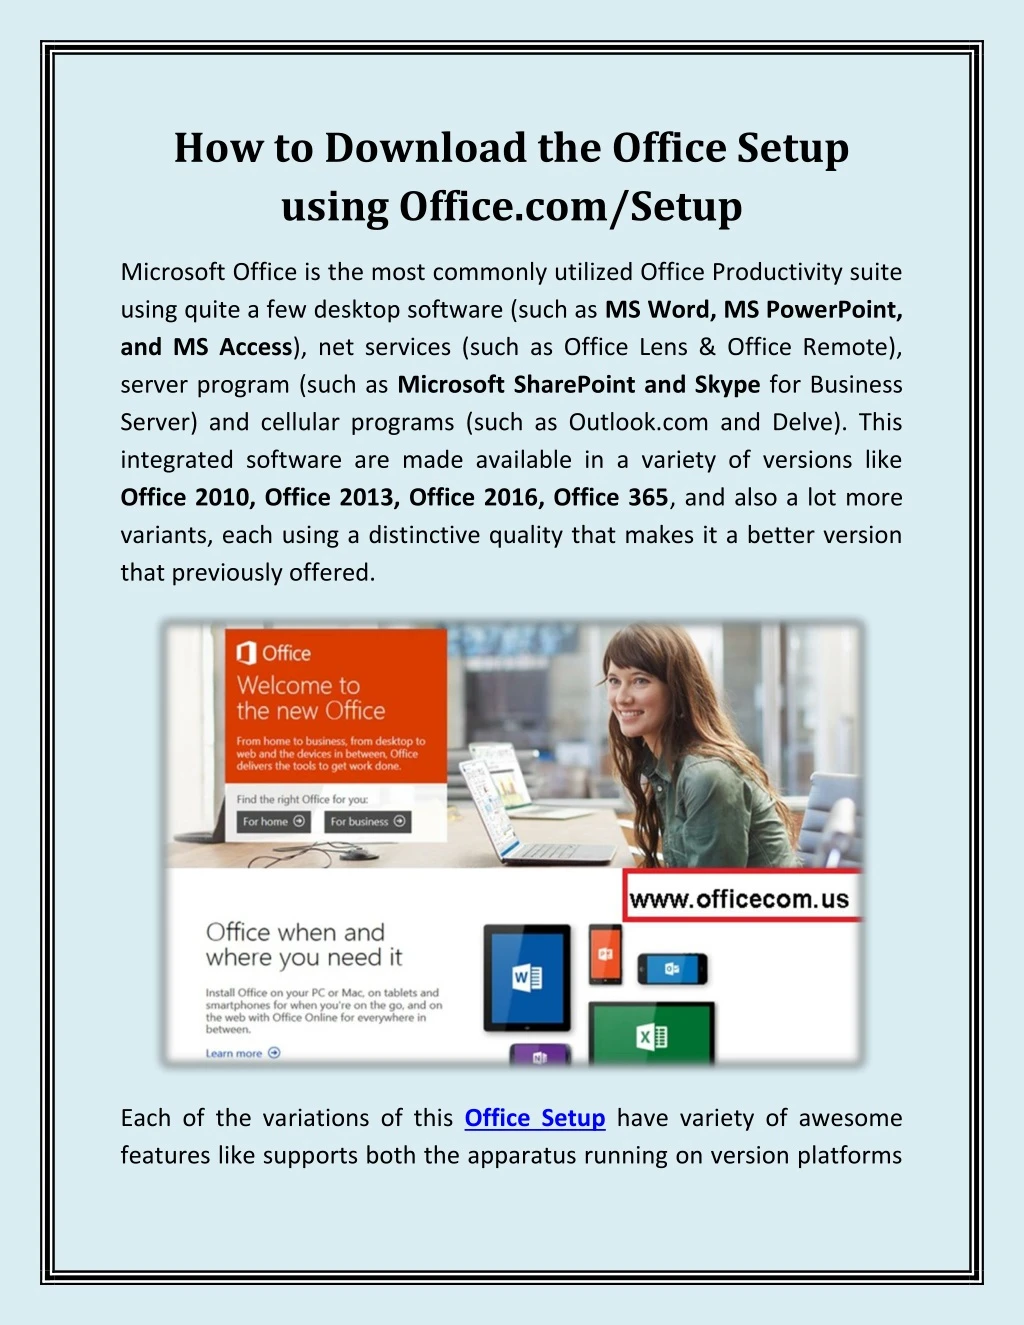 how to download the office setup using office